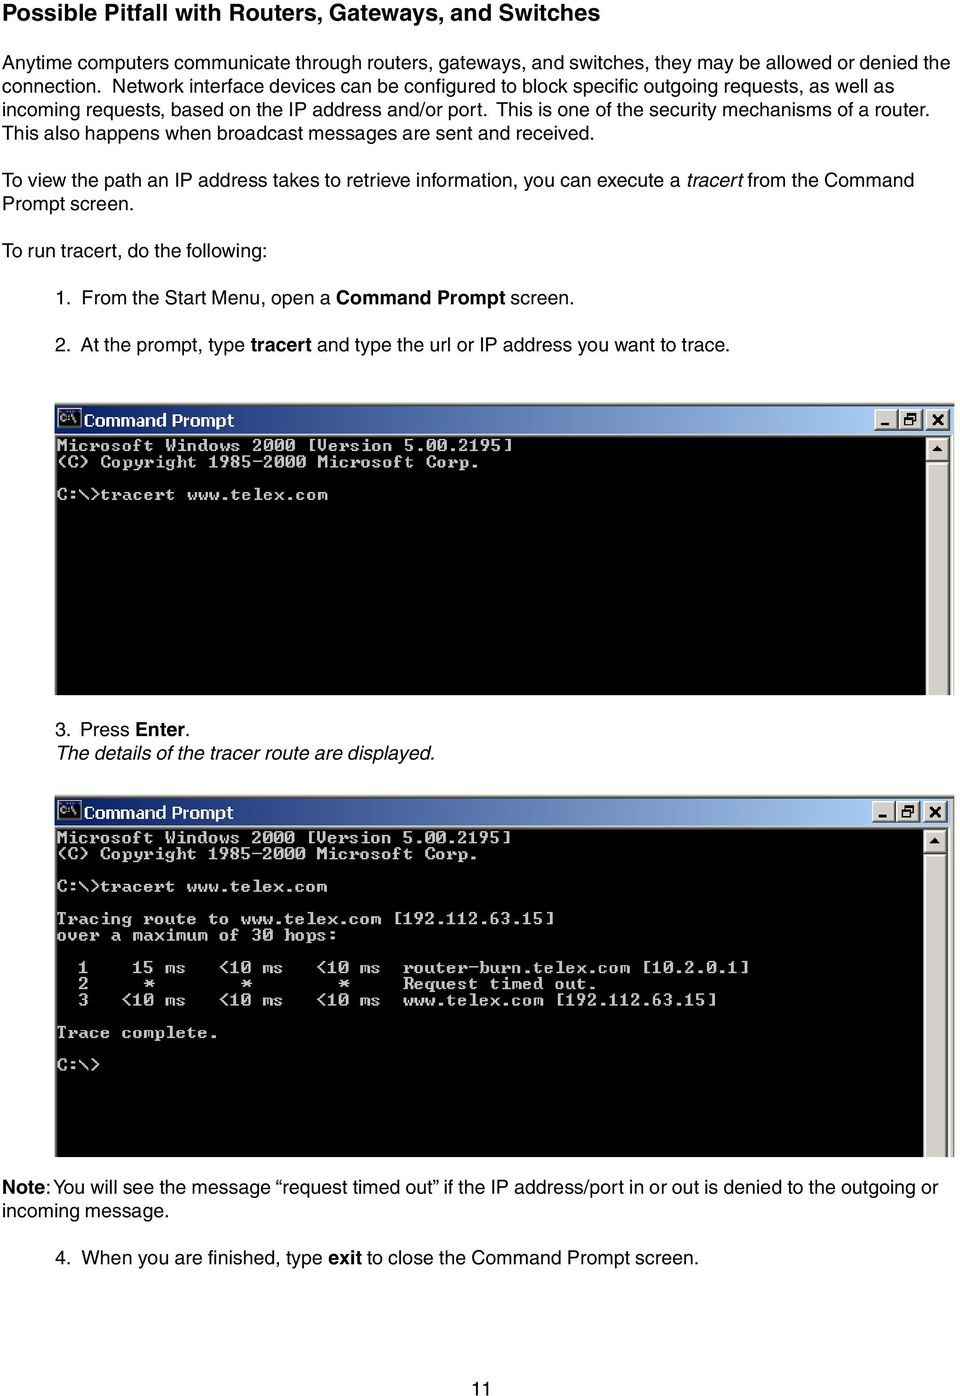 This also happens when broadcast messages are sent and received. To view the path an IP address takes to retrieve information, you can execute a tracert from the Command Prompt screen.